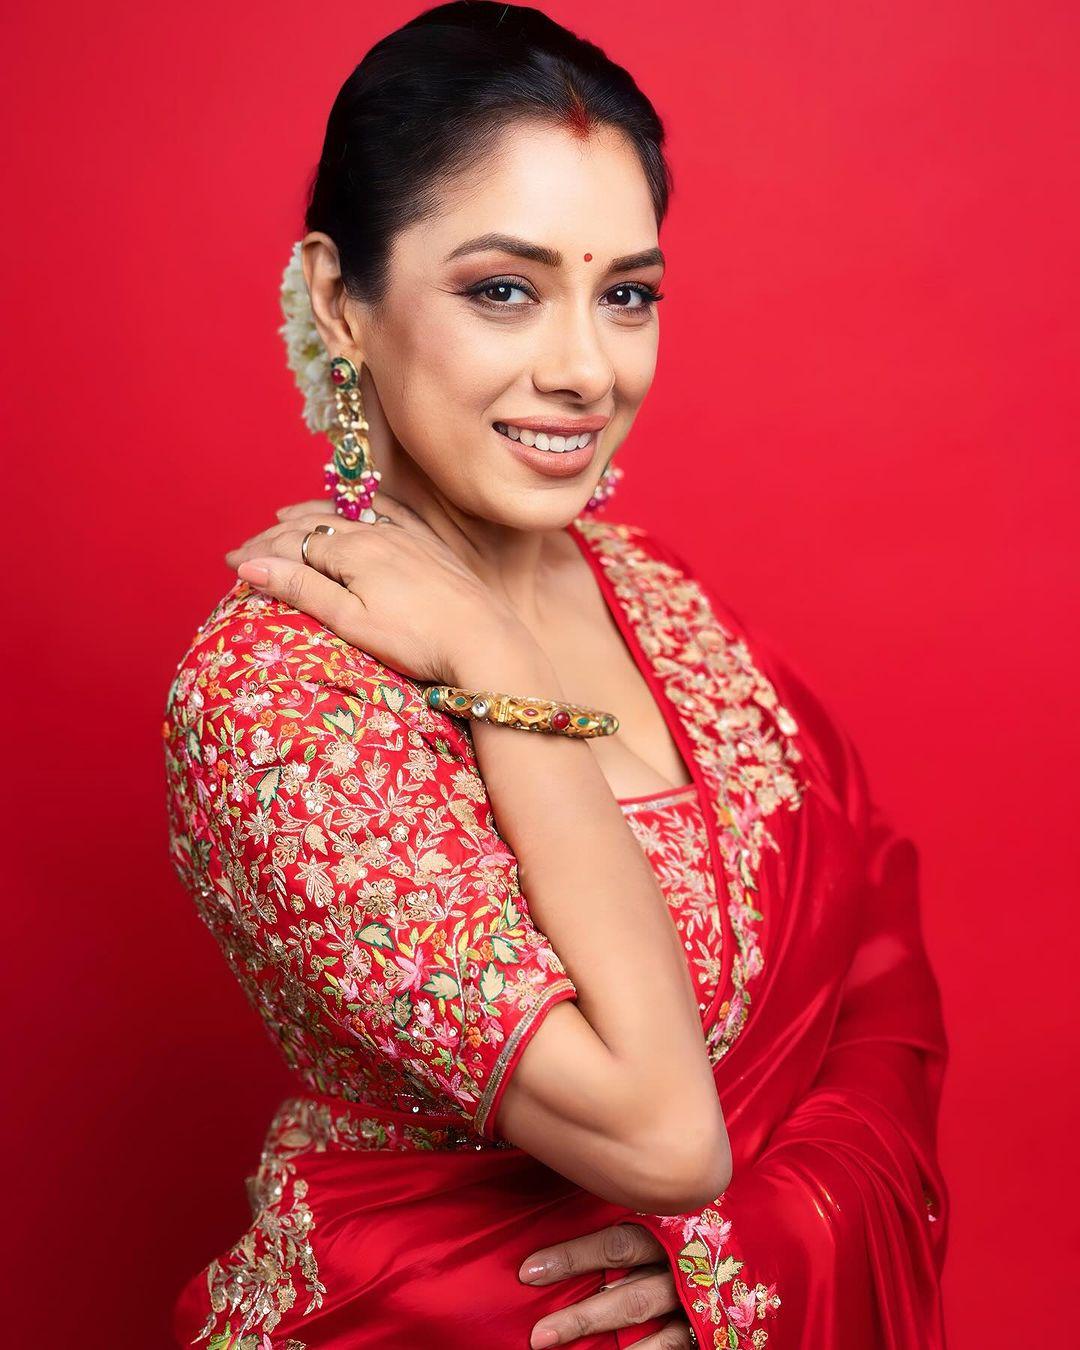 She tied her hair in a chic bun and elevated her hairstyle by adding a gajra to it. Rupali opted for nude makeup and minimal jewellery to complete her look